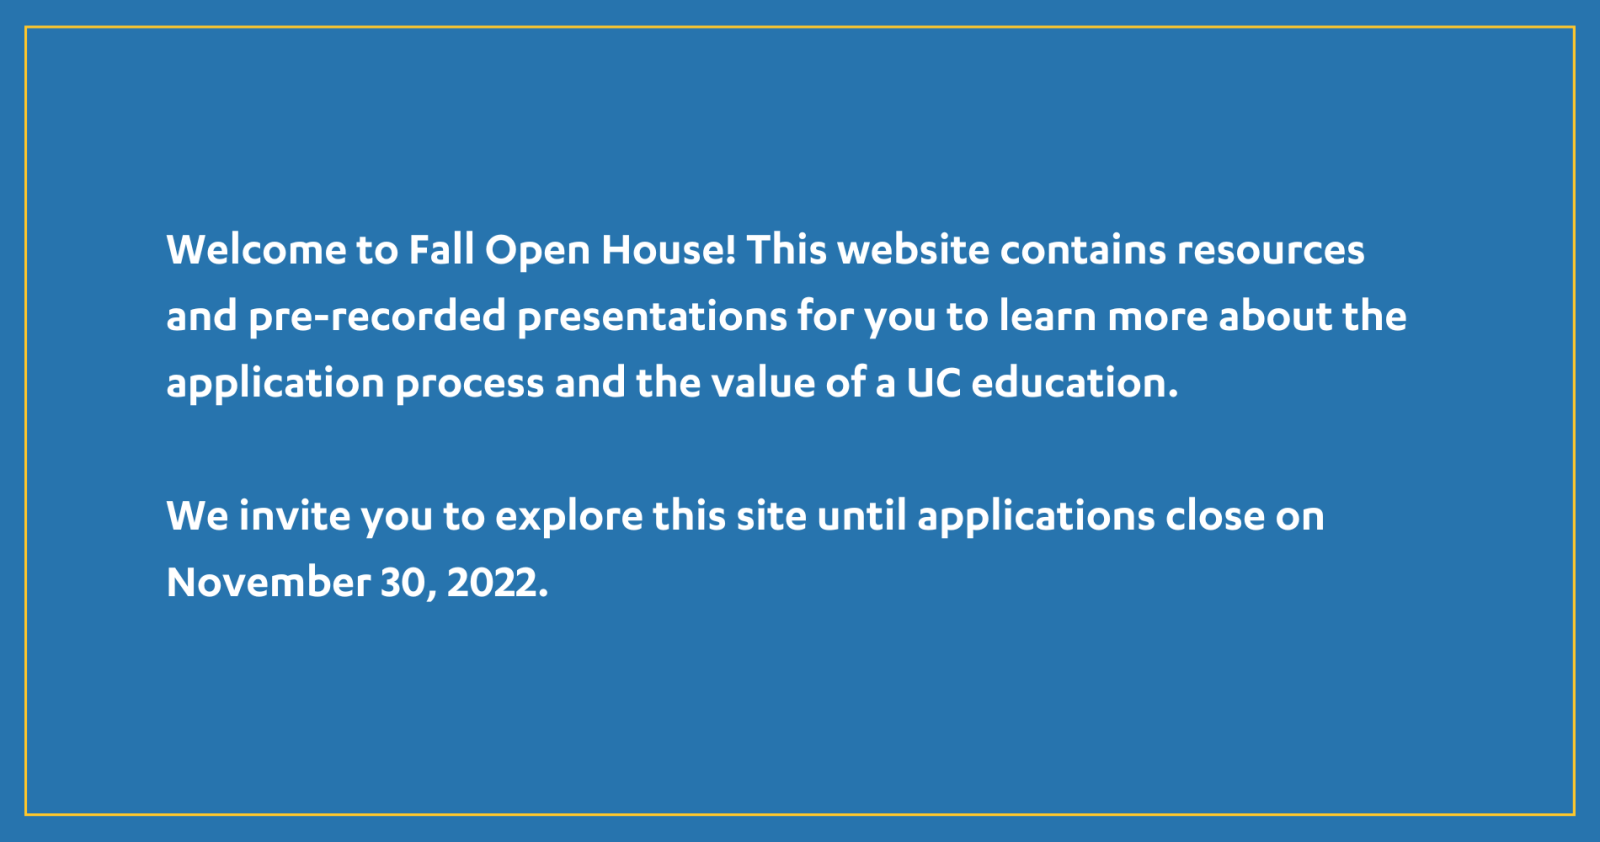 Welcome to Fall Open House! This website contains resources and pre-recorded presentations for you to learn more about the application process and the value of a UC education. We invite you to explore this site until applications close on November 30, 2022.